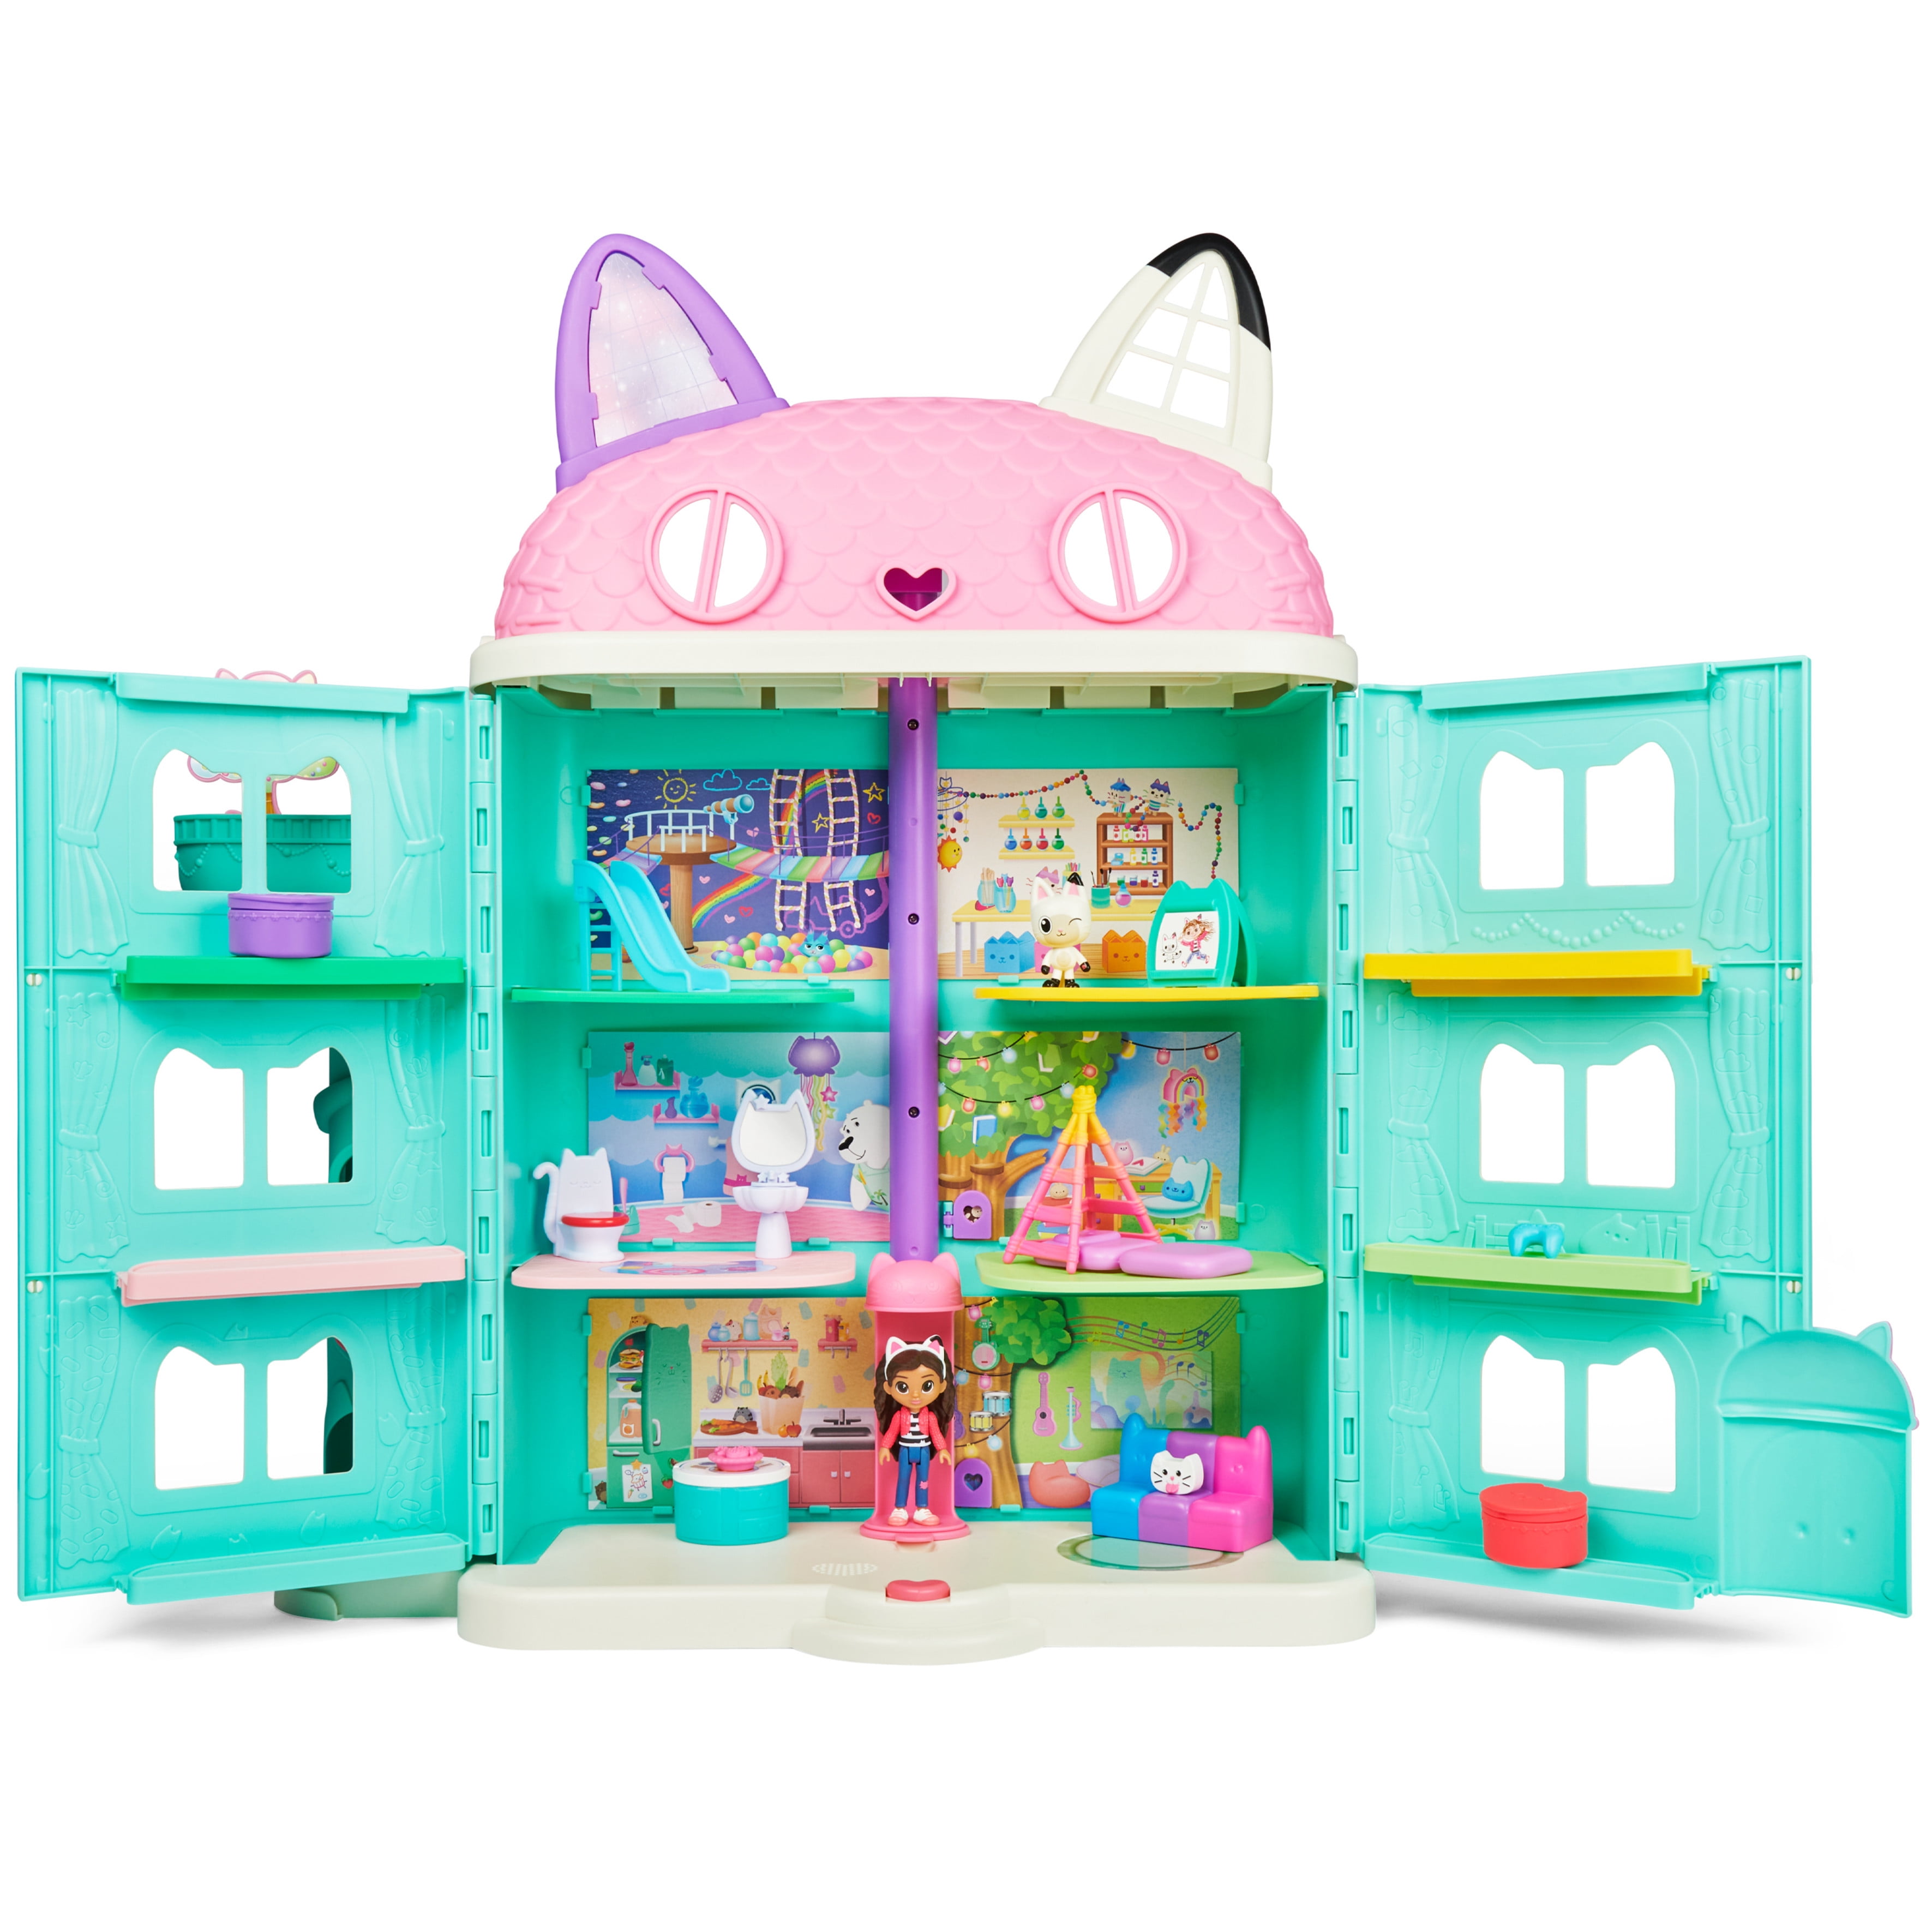 Gabby’s Dollhouse, (over 2ft )15-Piece Purrfect Dollhouse with Sounds, Assembly Required